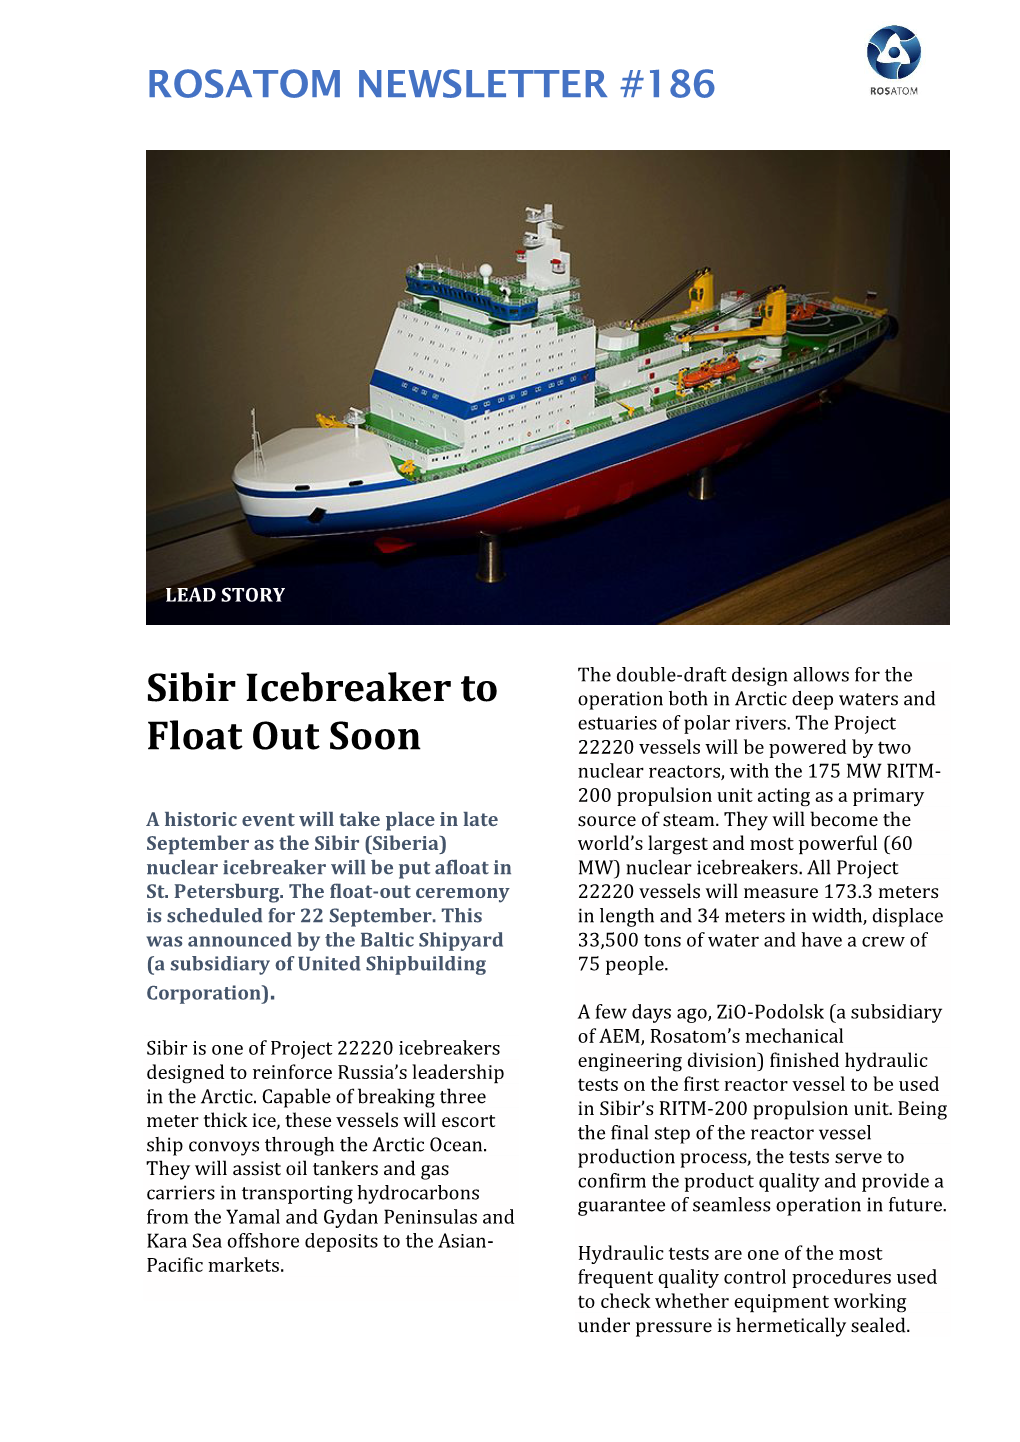 Sibir Icebreaker to Float out Soon